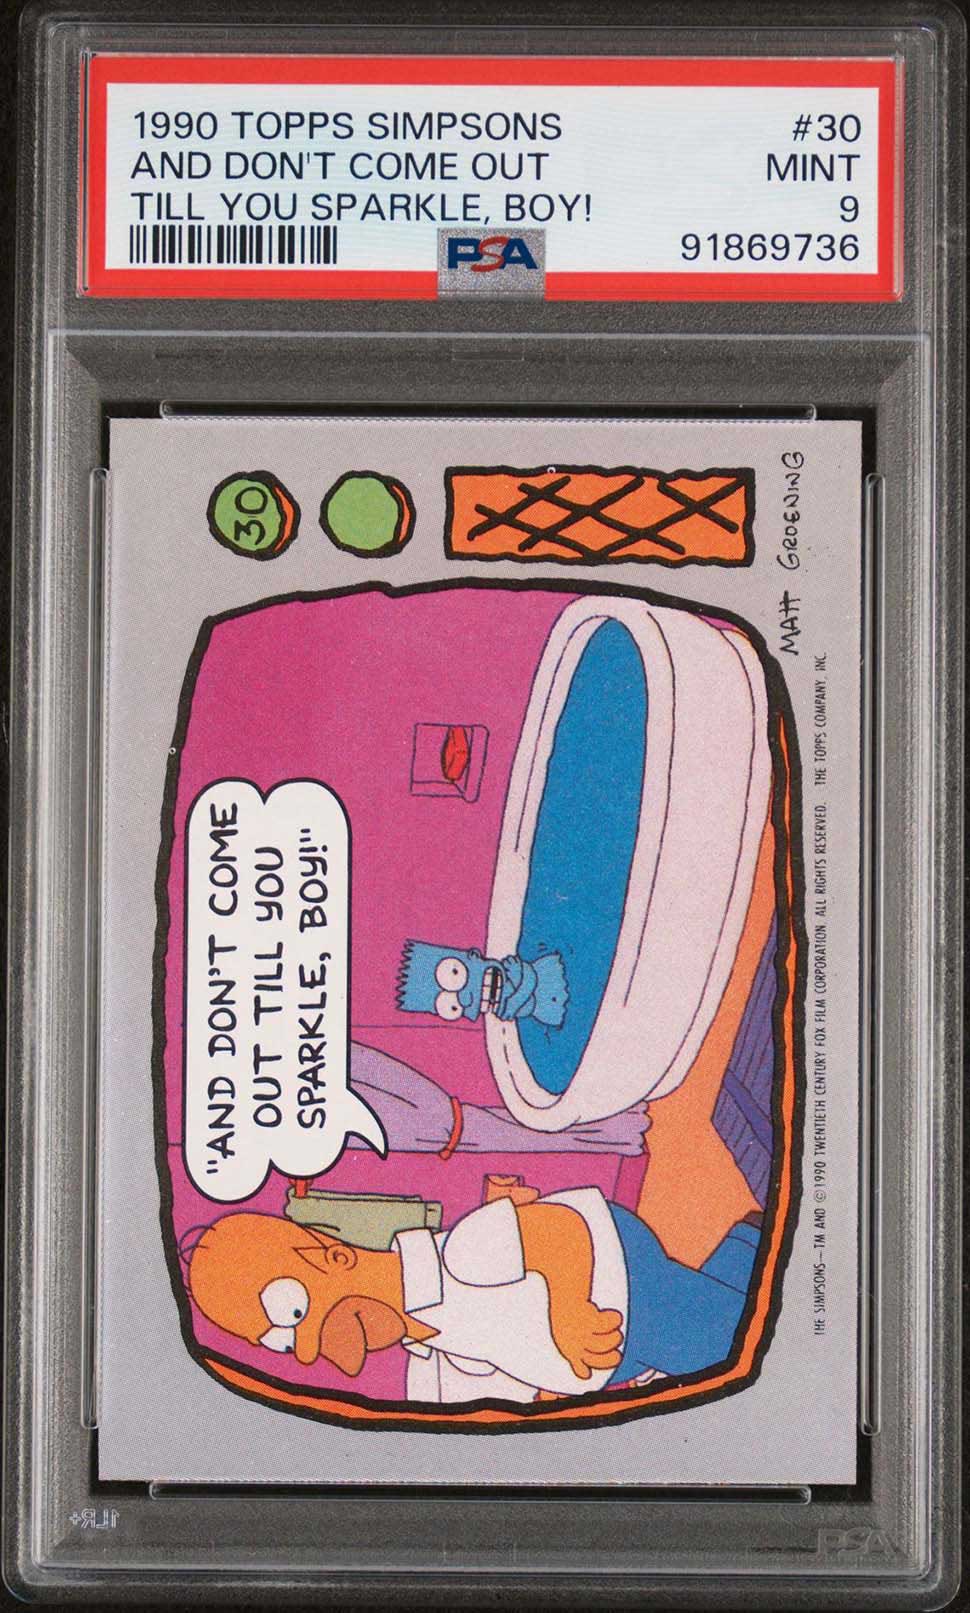 BART HOMER SIMPSON PSA 9 1990 Topps The Simpsons and Don't Come Out Till You Sparkle, Boy! #30 The Simpsons Base Graded Cards - Hobby Gems